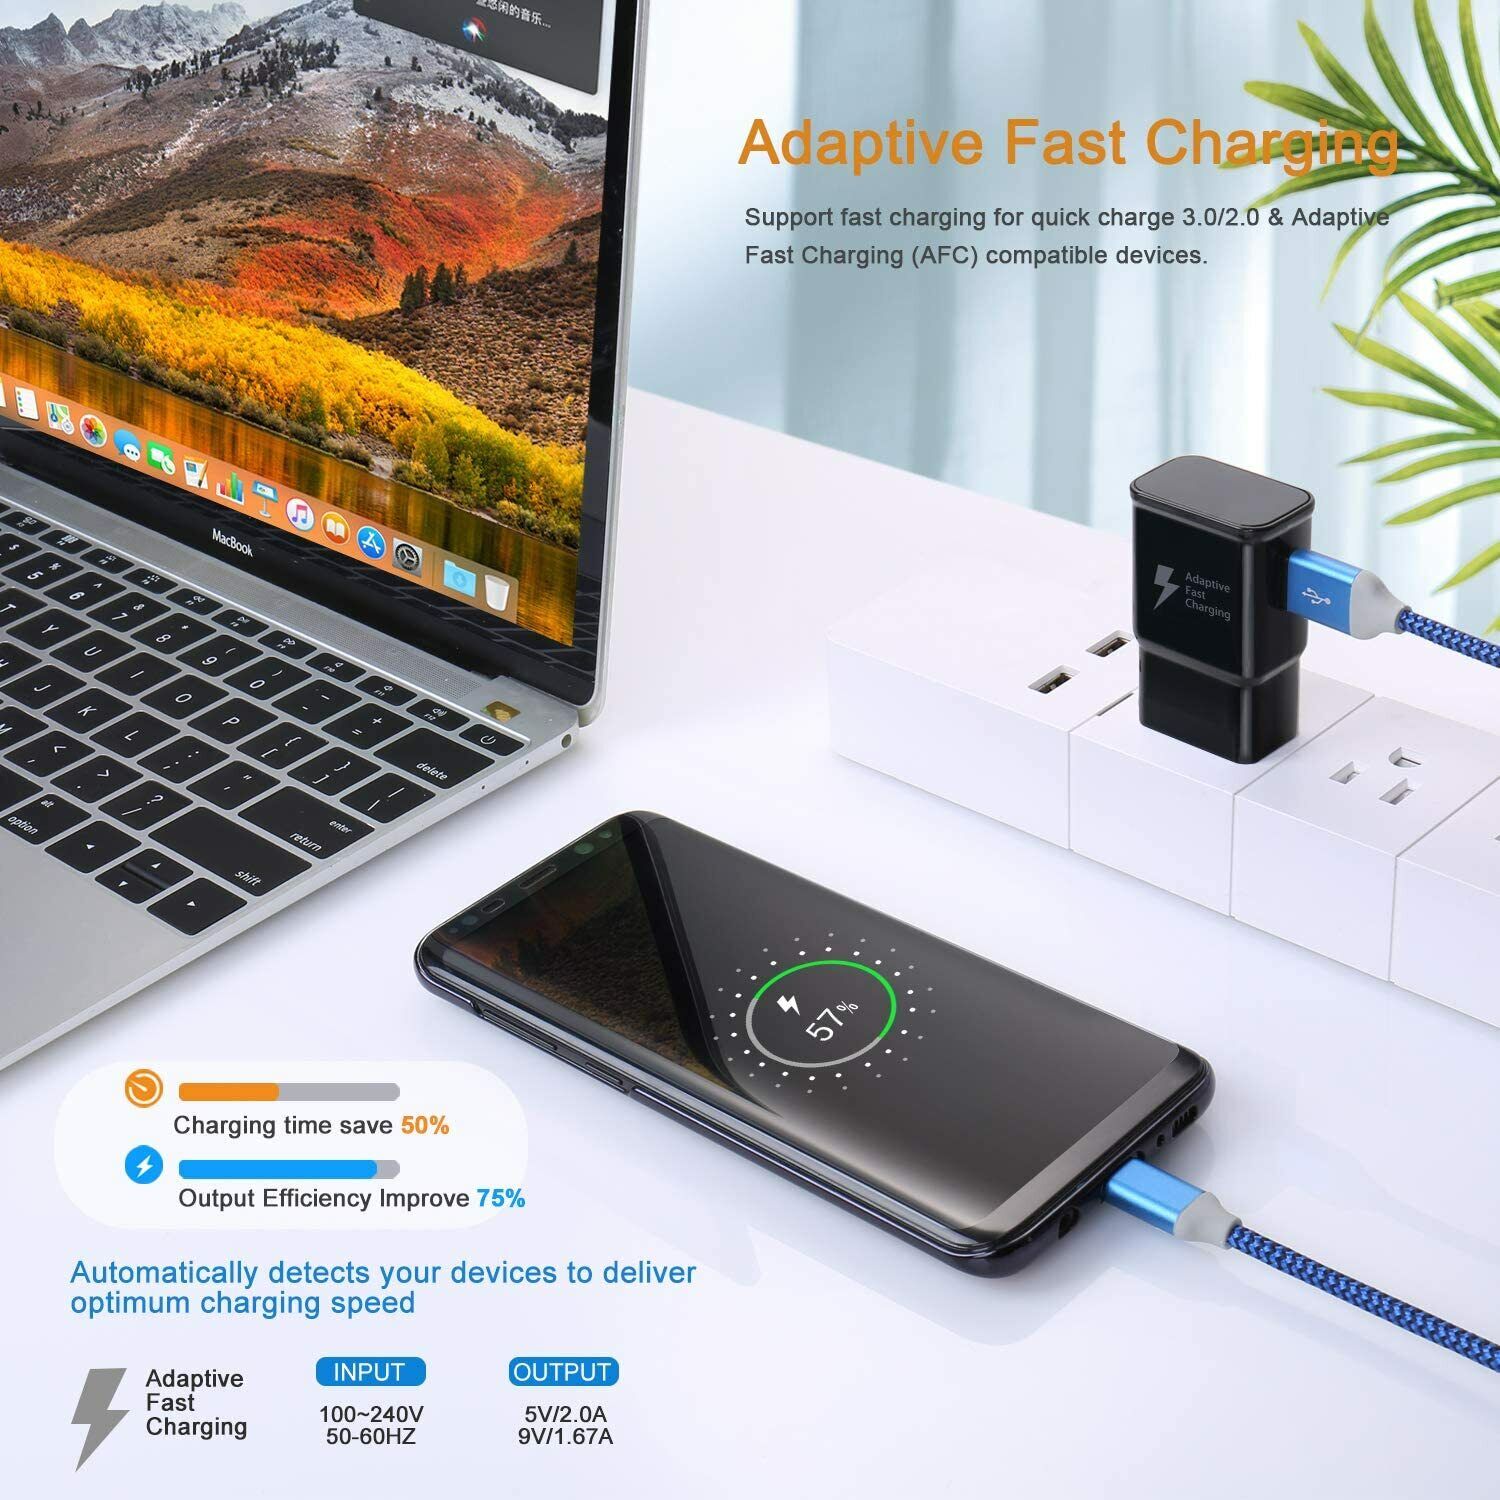 2x Adaptive Fast Charging Wall Plug Charger For Samsung iPhone Galaxy S10 Note 8 Unbranded Does Not Apply - фотография #5